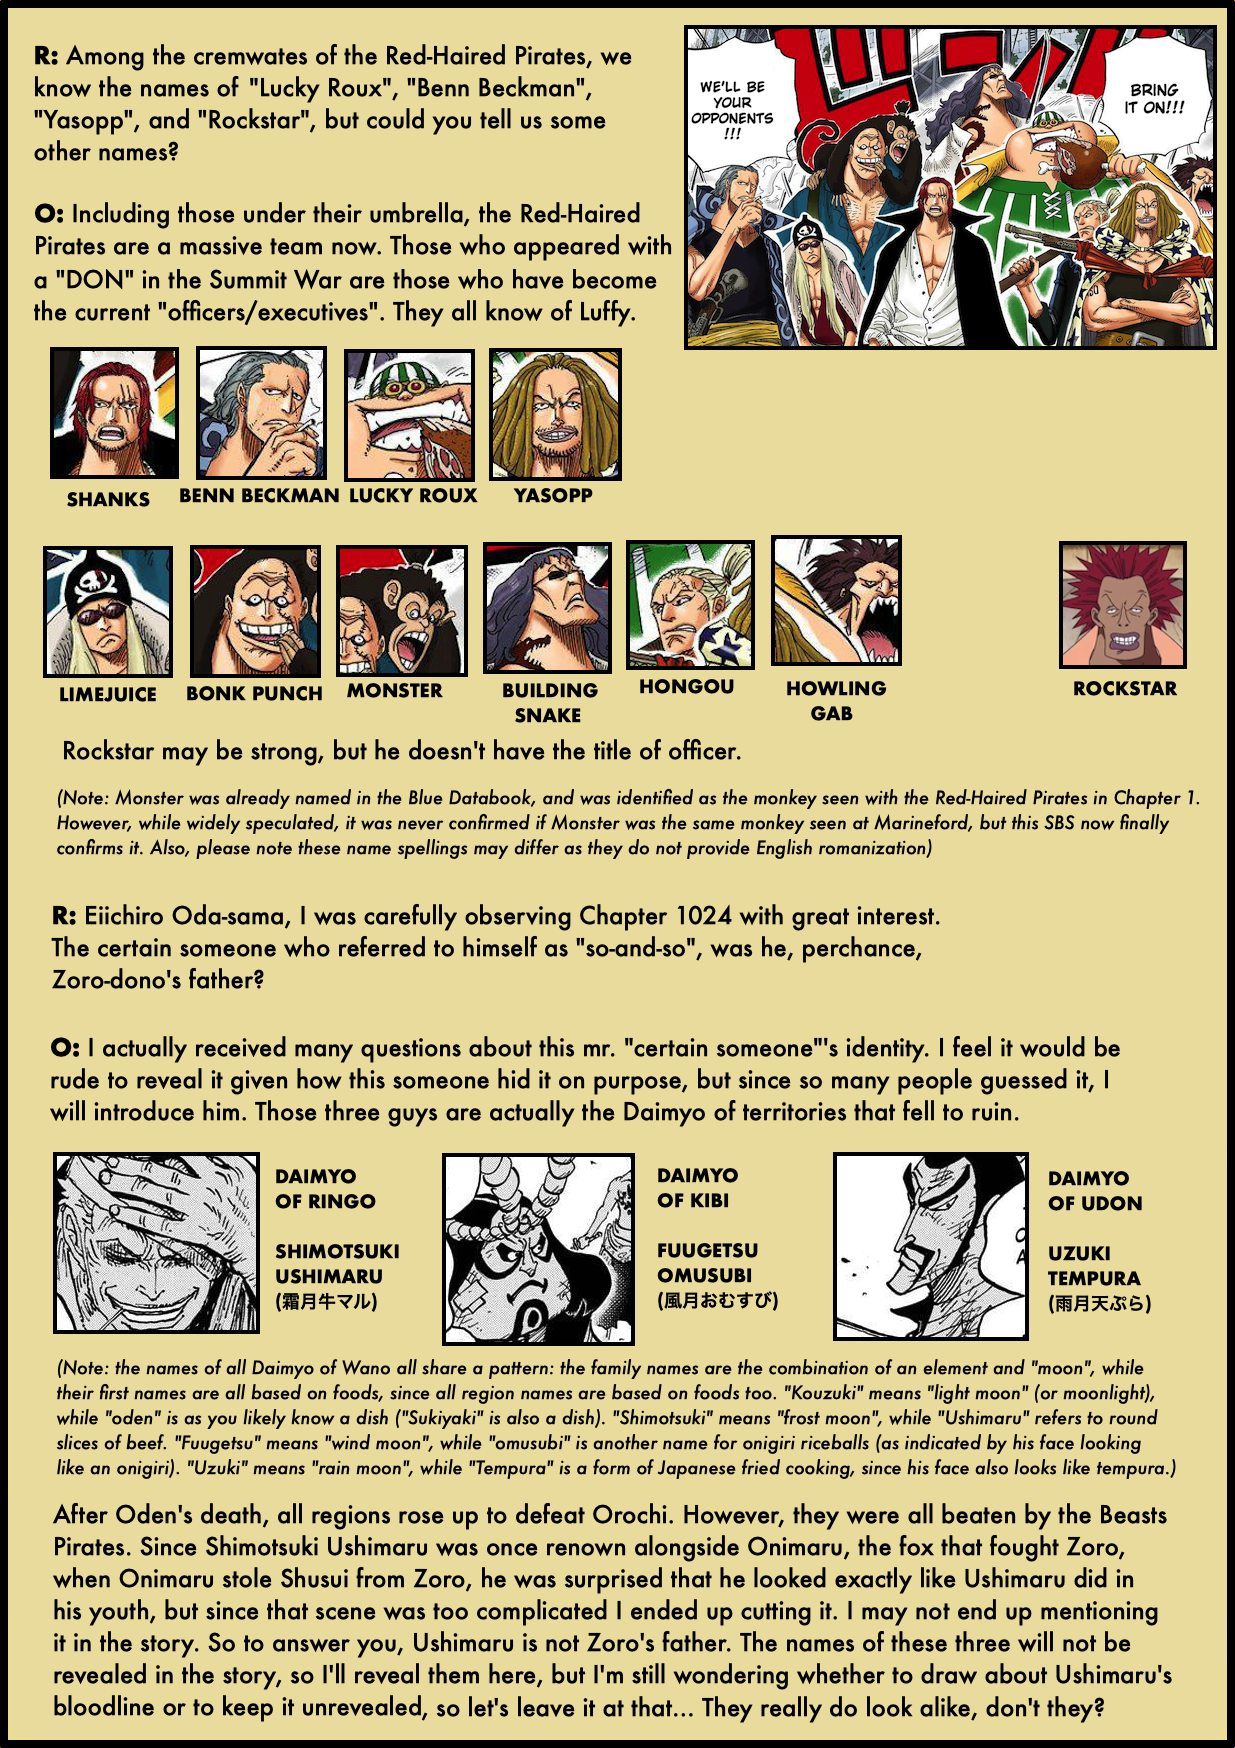 The One Piece World Explained (One Piece 101) 